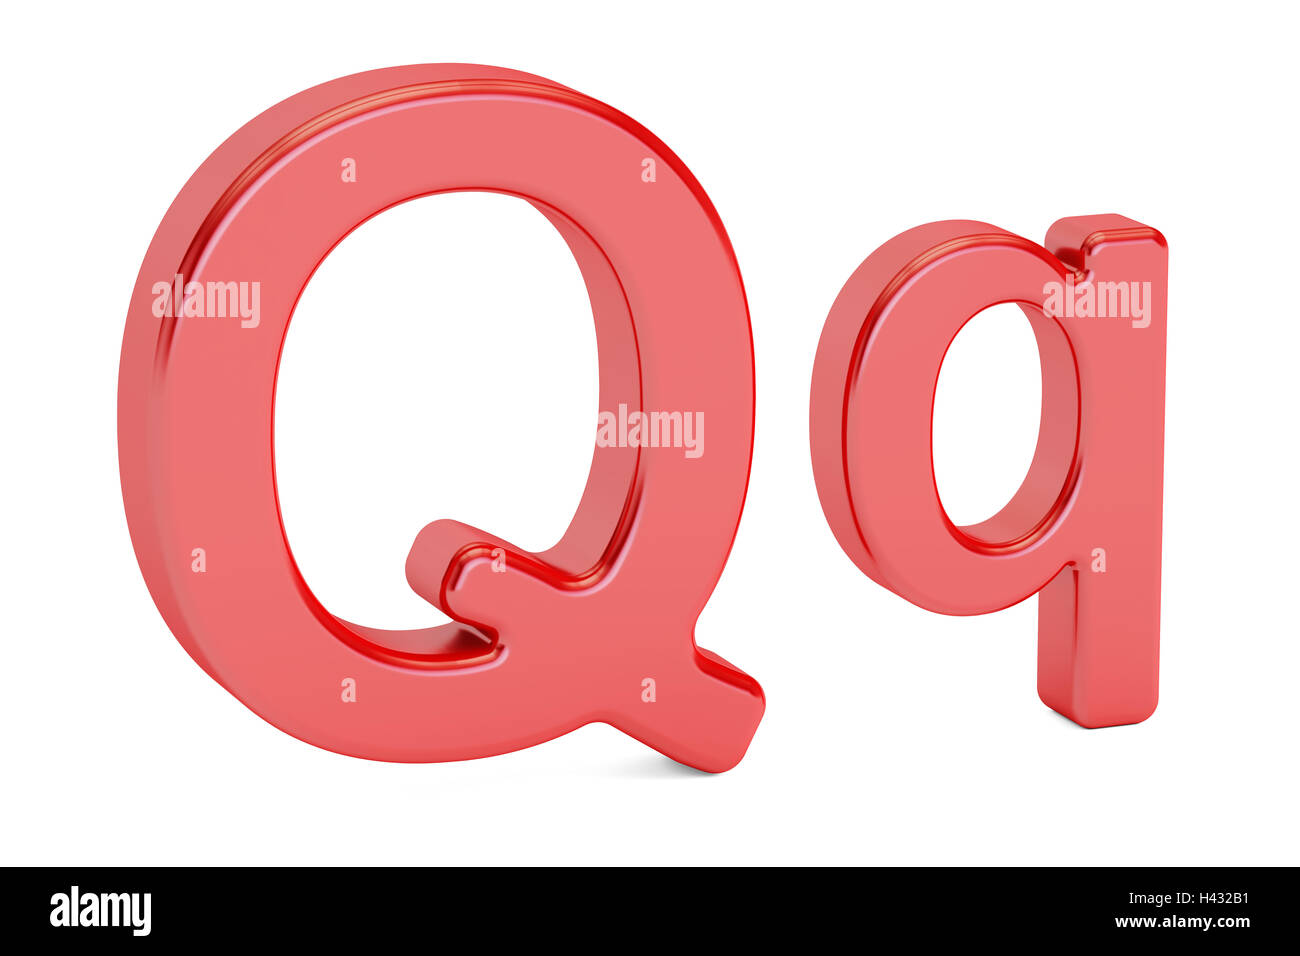 Red letter Q alphabet, 3D rendering isolated on white background Stock Photo